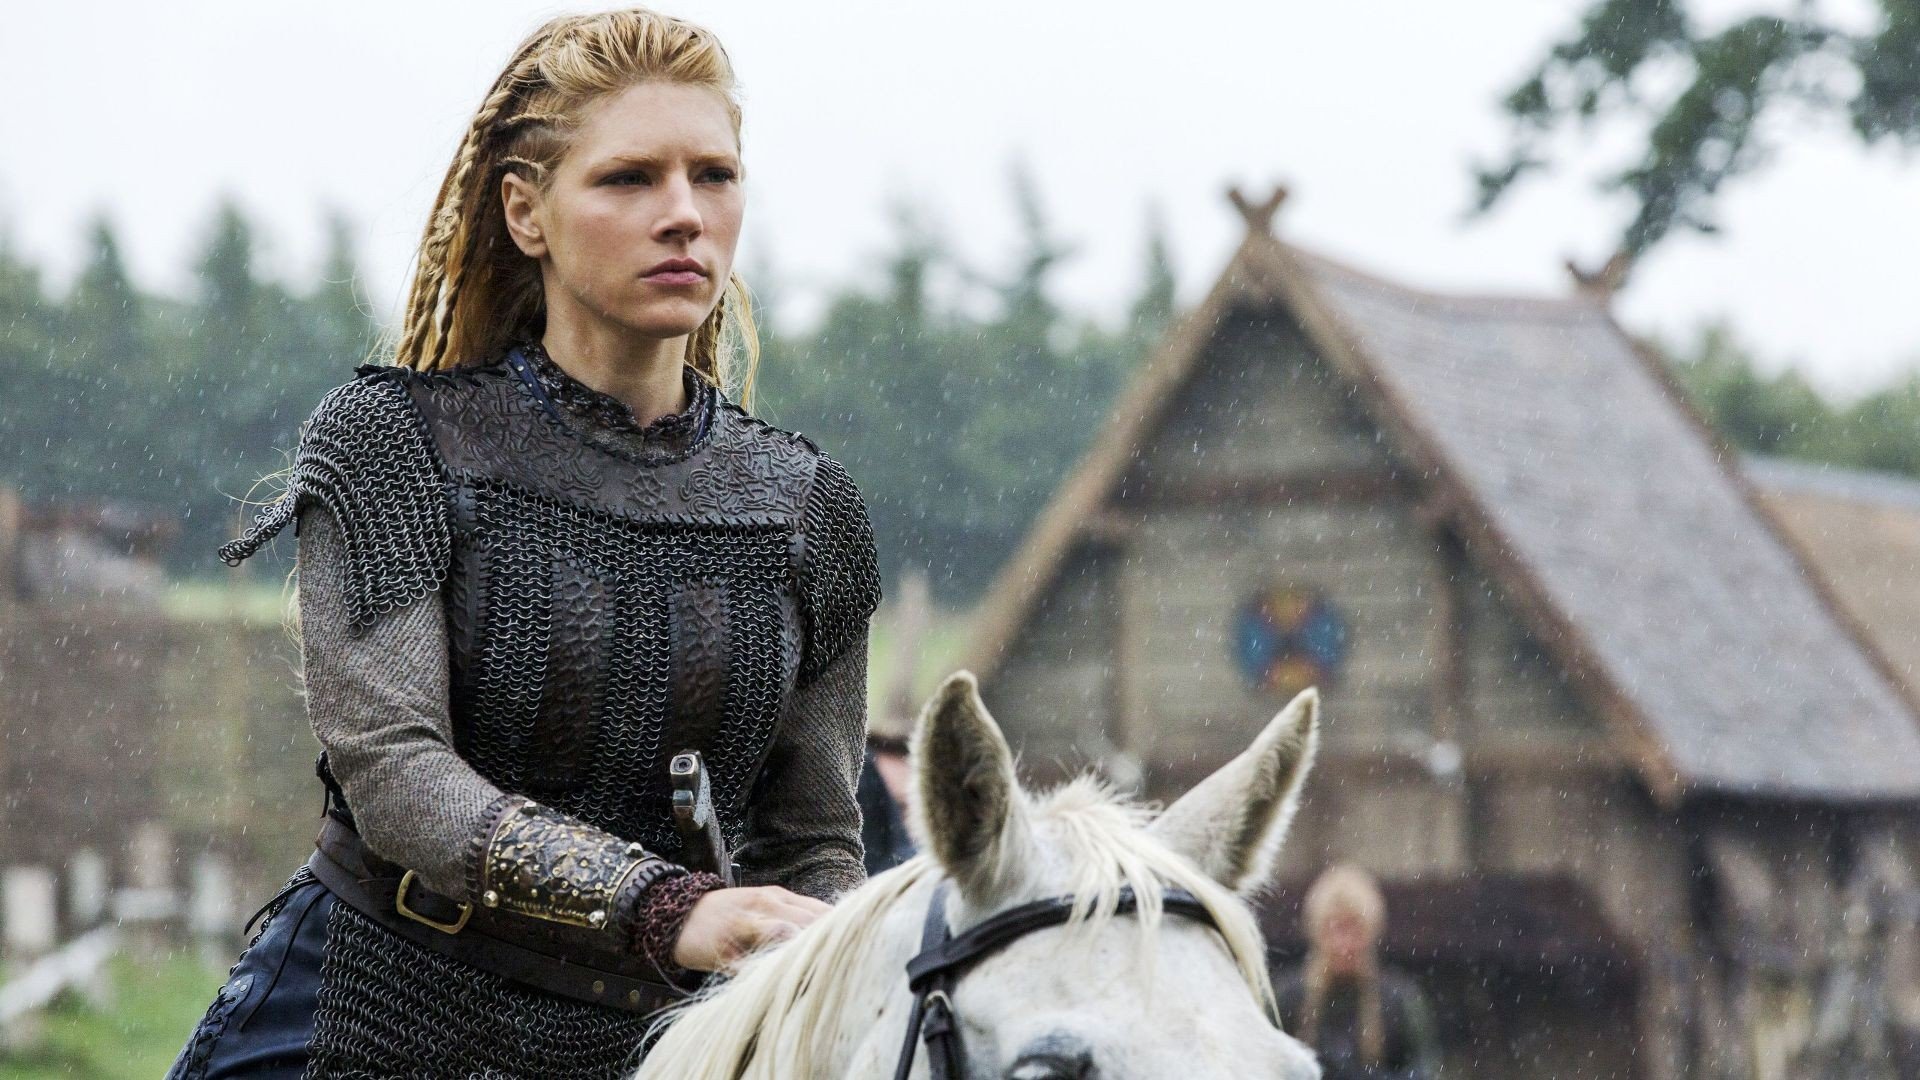 Shield-Maidens or Housewives? The Real Role of Viking Women - Owlcation